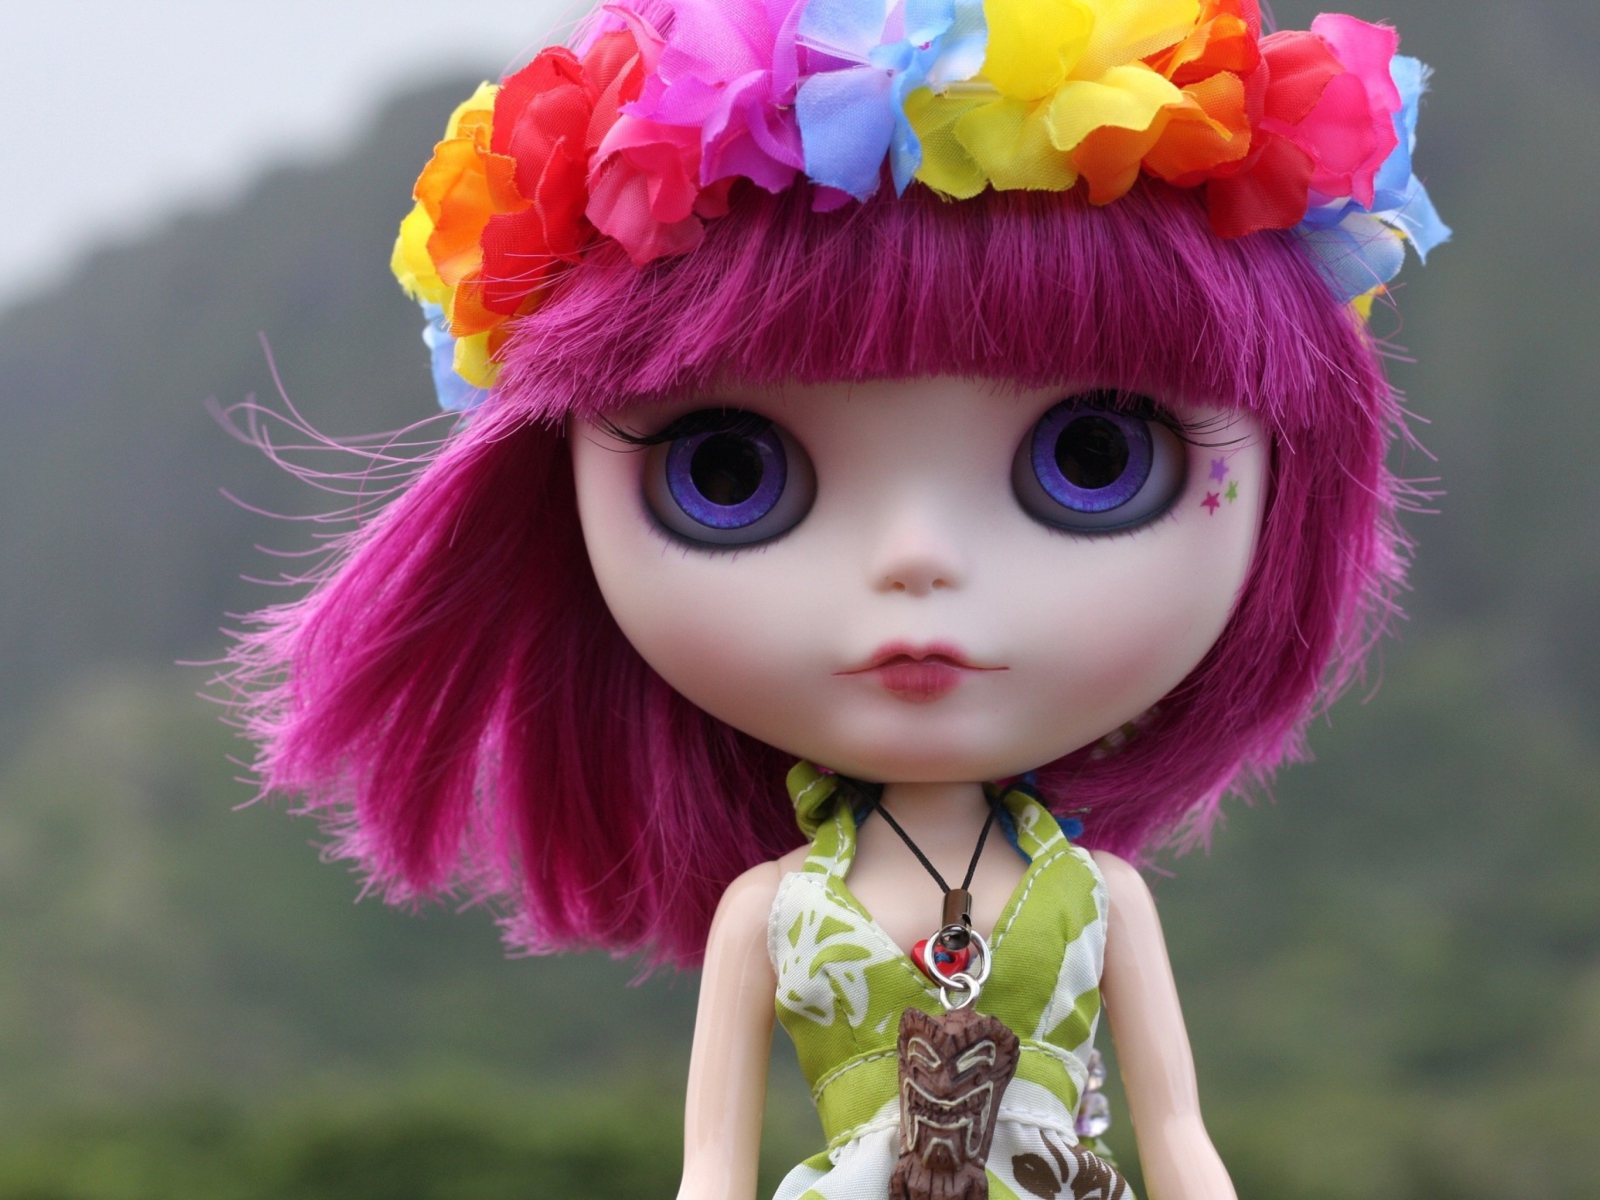 Doll With Pink Hair And Blue Eyes wallpaper 1600x1200